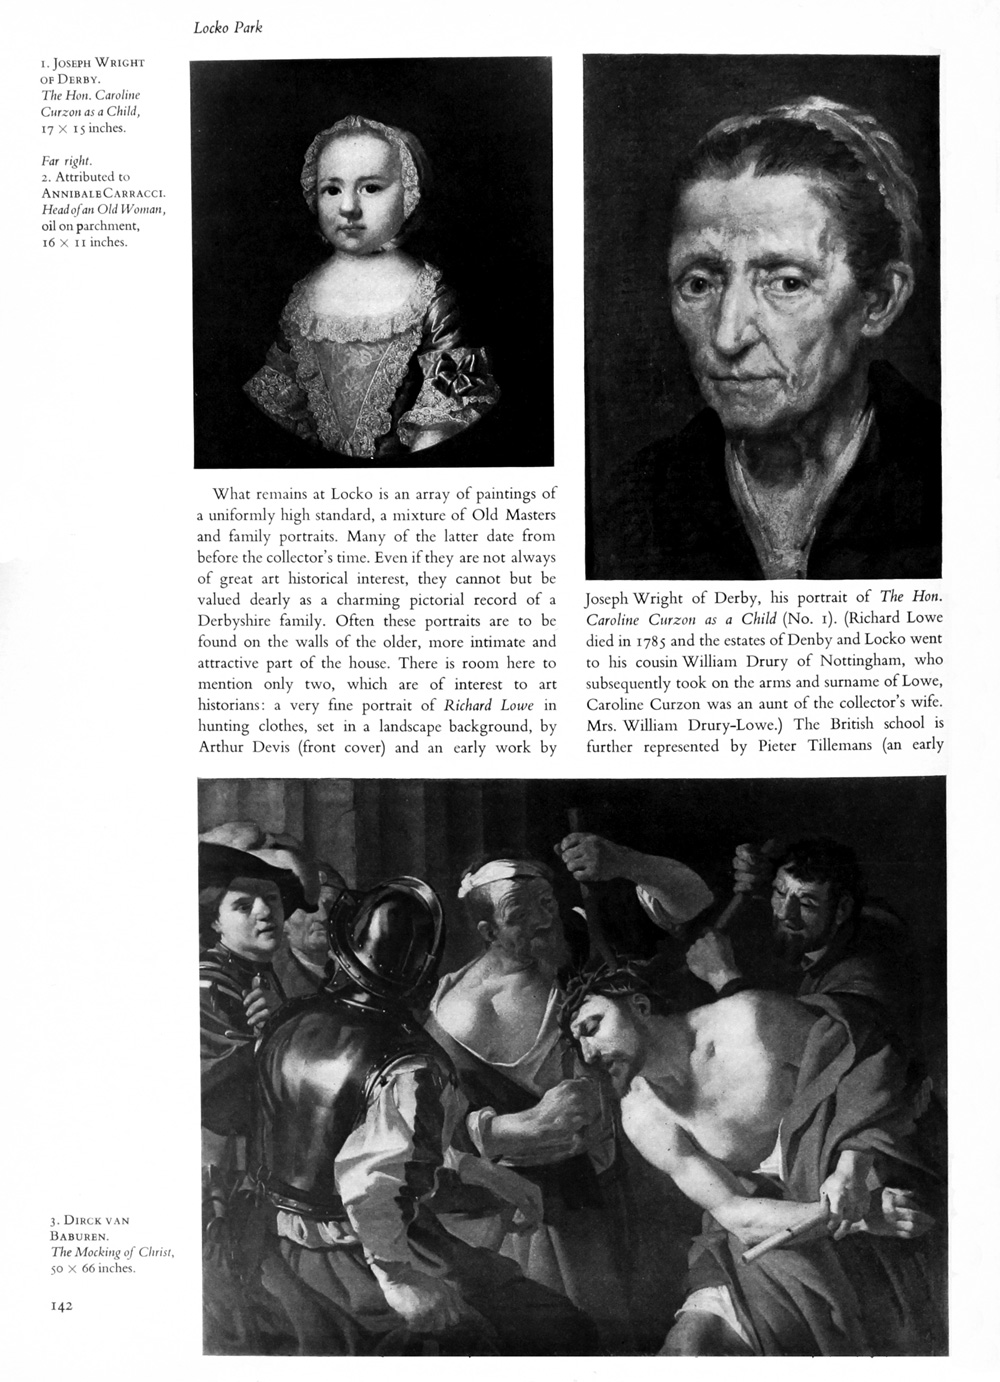 The CONNOISSEUR back issues - June 1976 - LOCKO PARK an important Family Collection by Richard Calvocoressi Page 142 - Back To List of Art Magazines